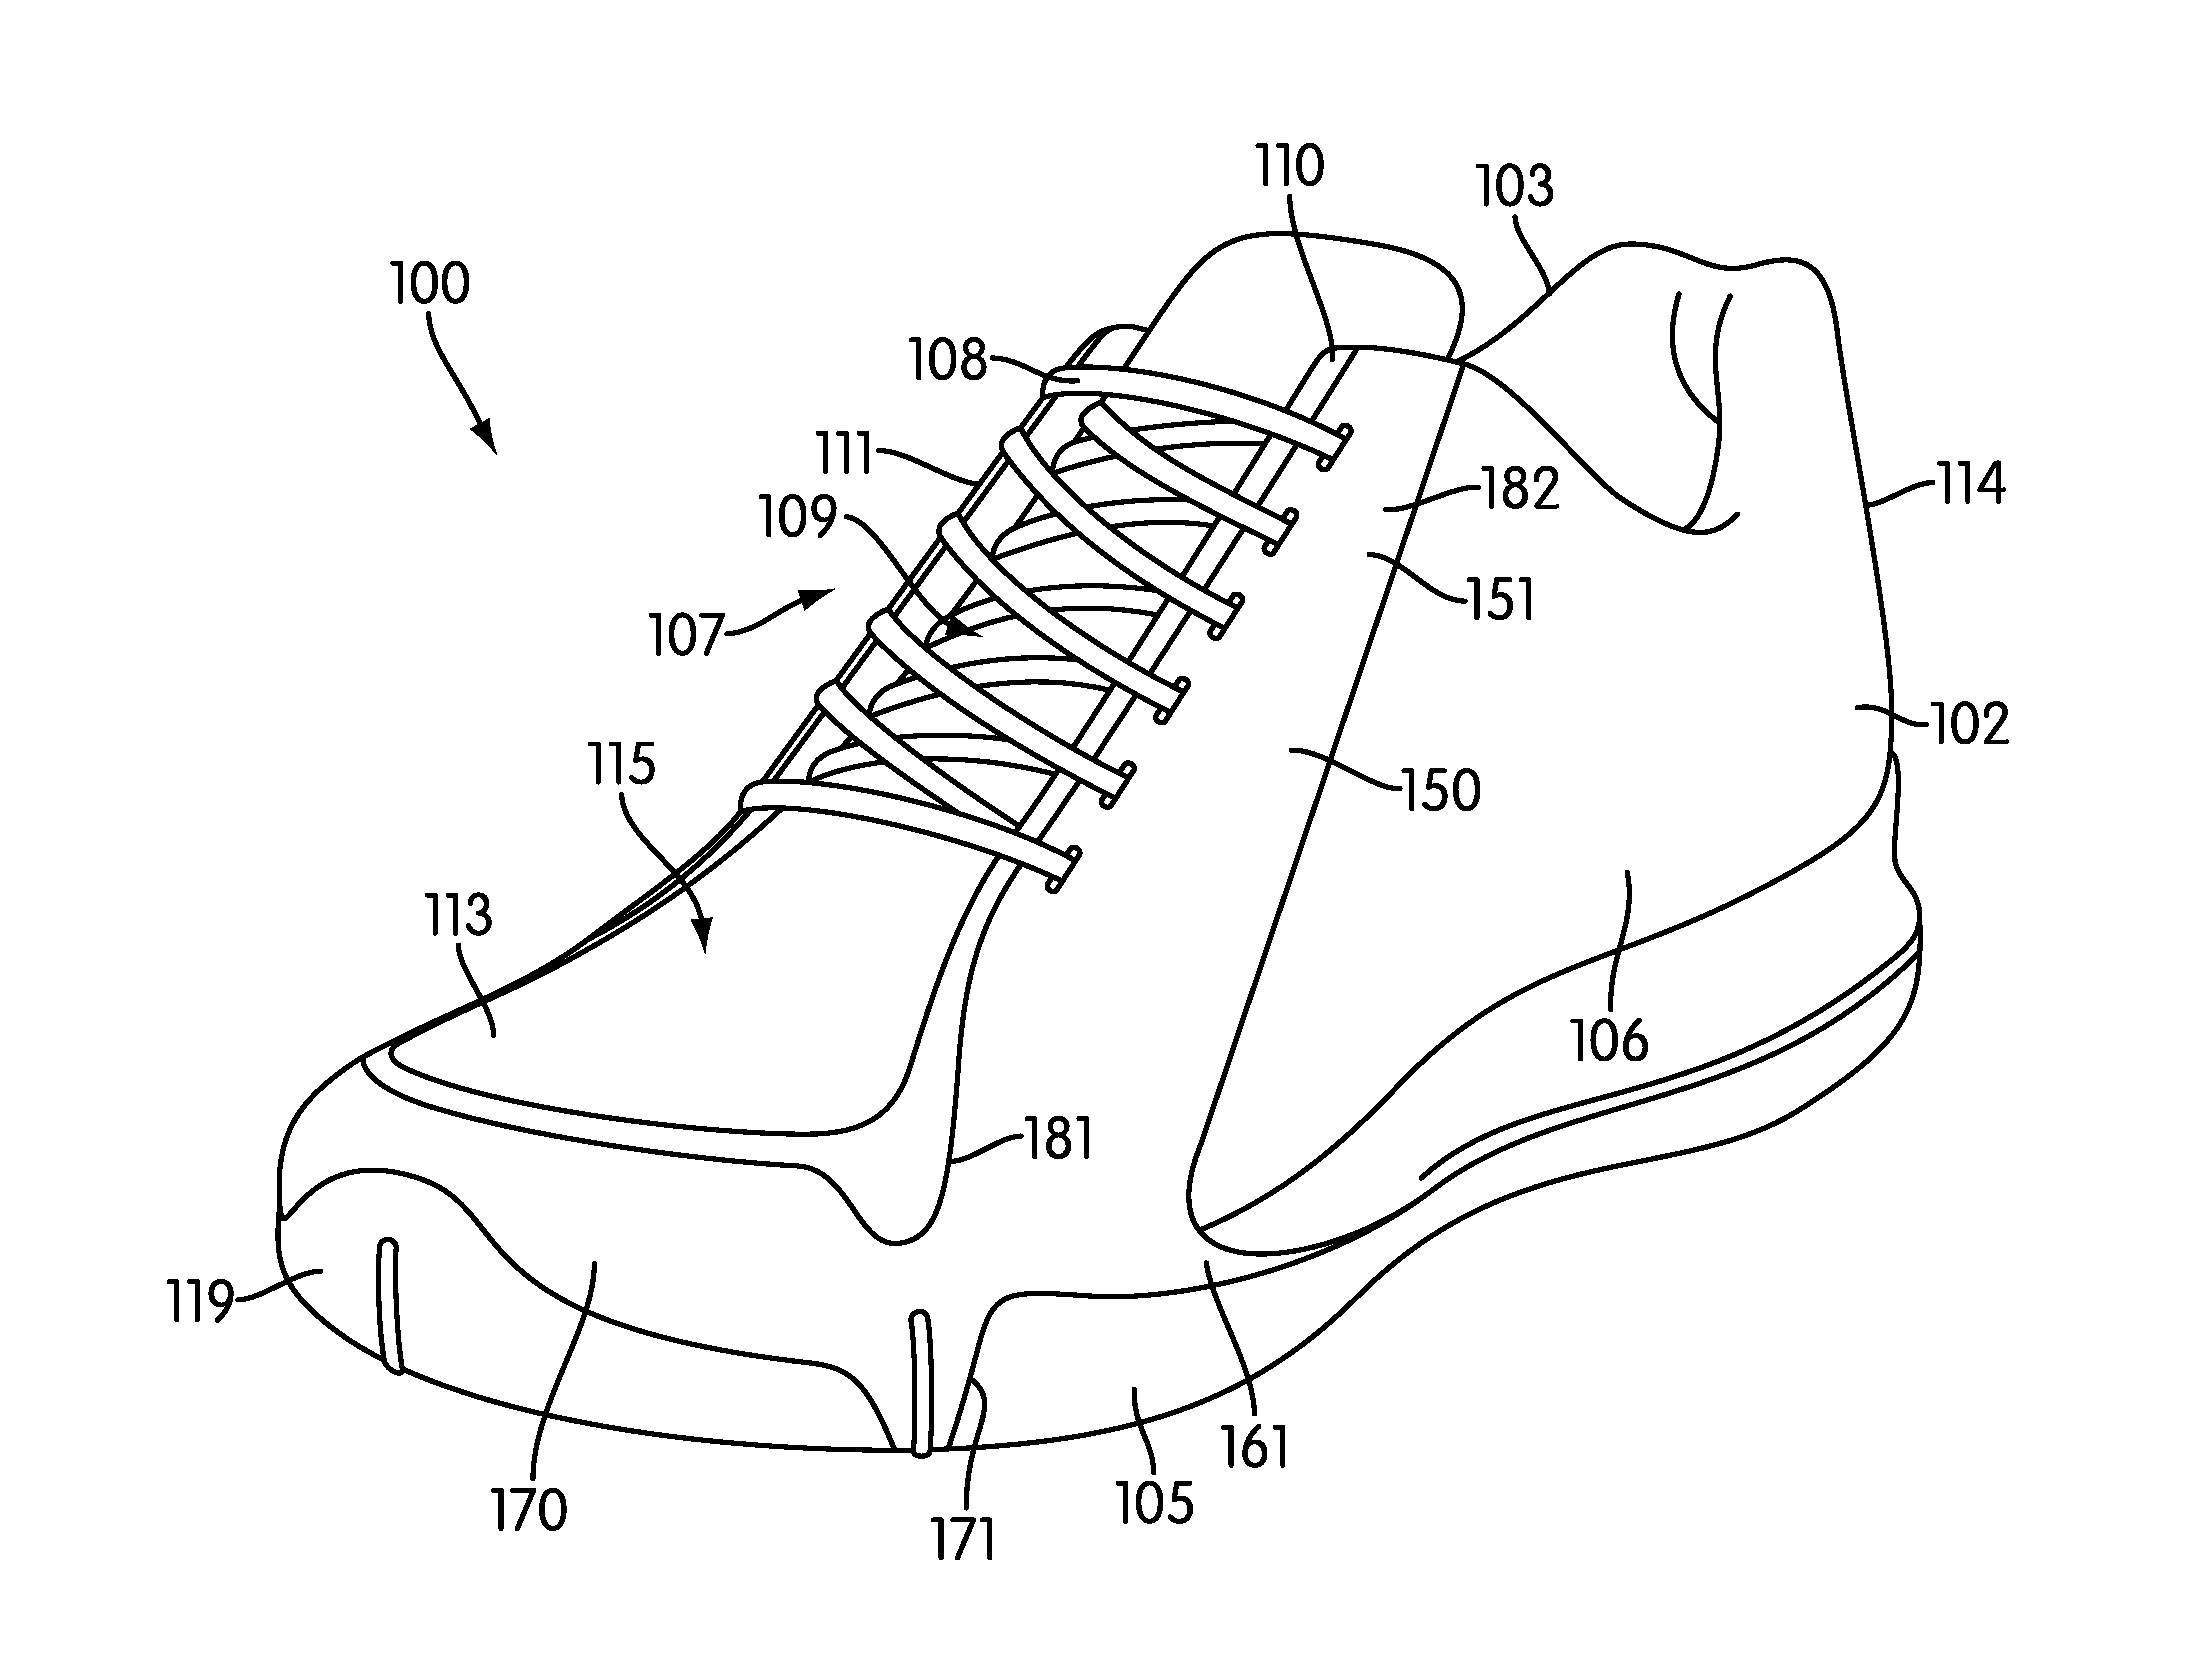 Article of footwear with arch wrap